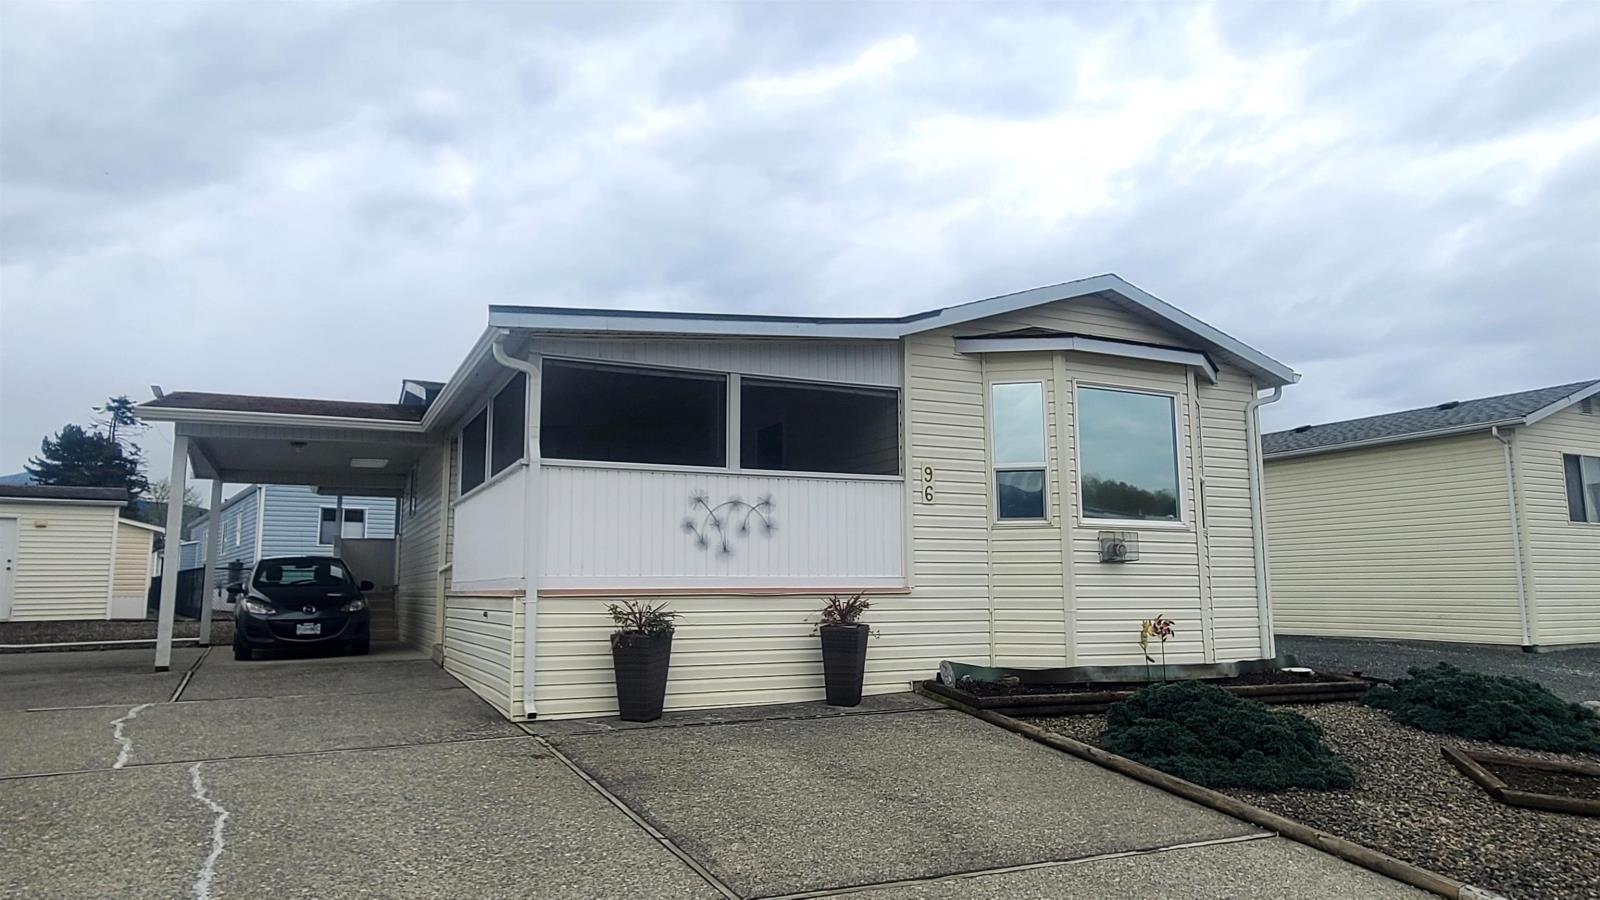 Chilliwack Manufactured Home for sale:  2 bedroom 936 sq.ft. (Listed 2106-02-06)